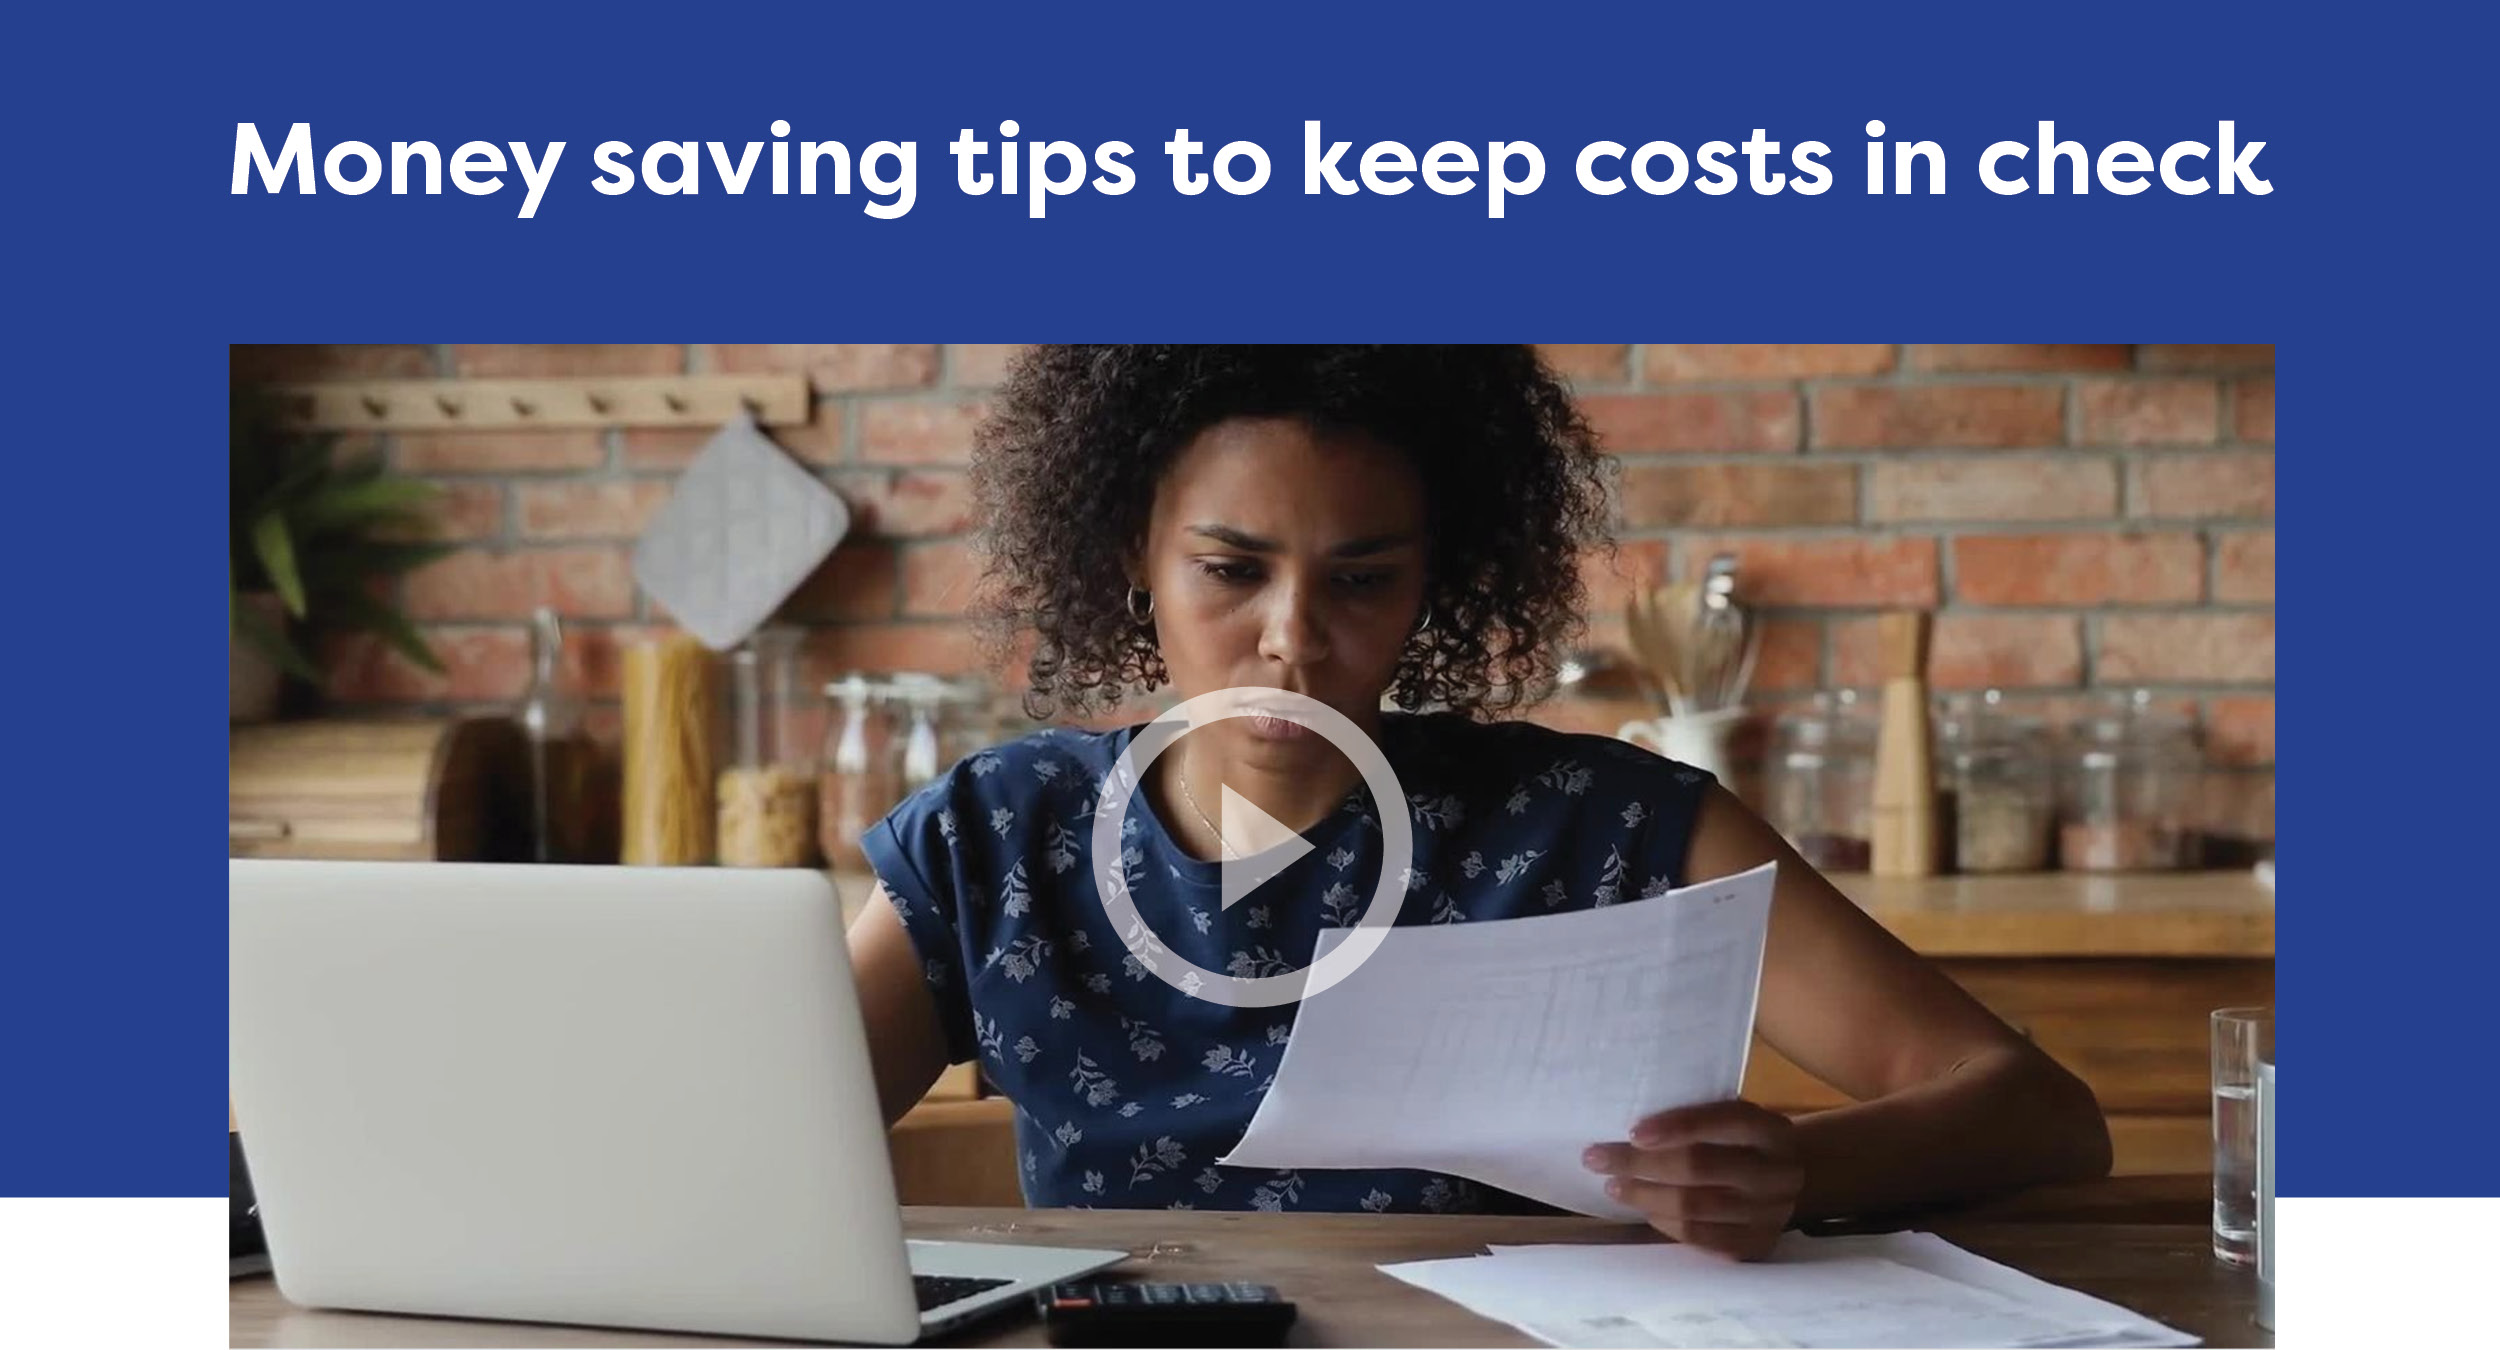 Money saving tips to keep costs in check